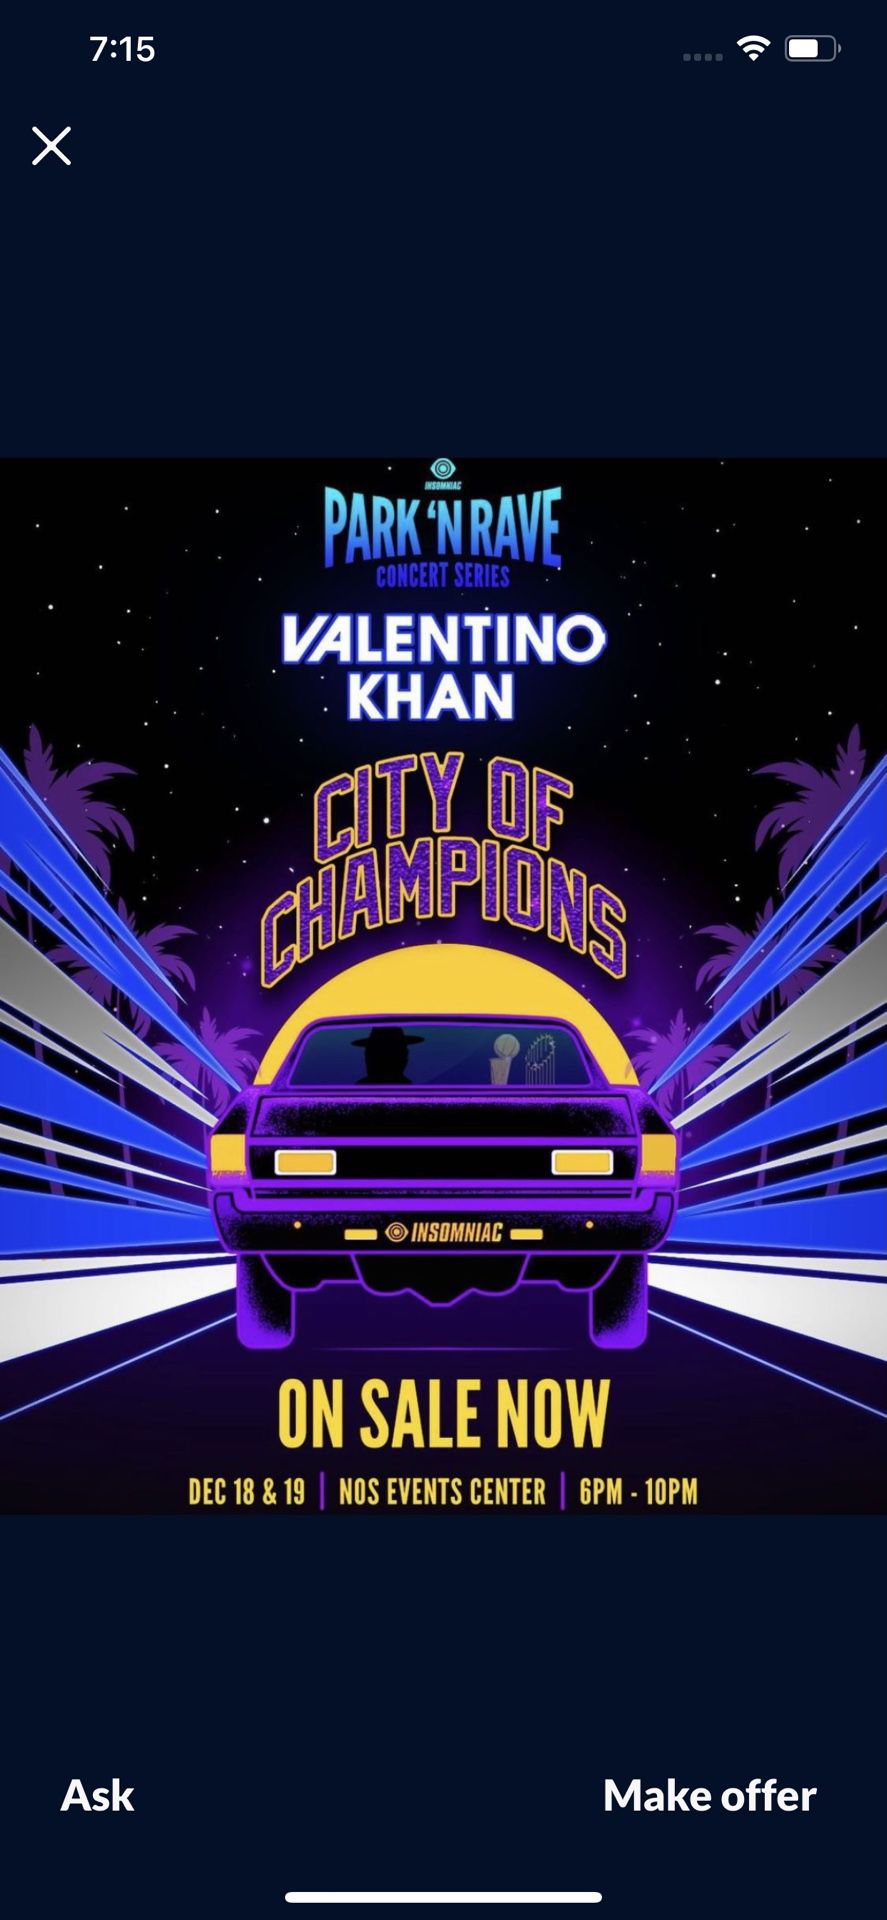 Valentino Khan Parknrave City Of Champions Friday Pink